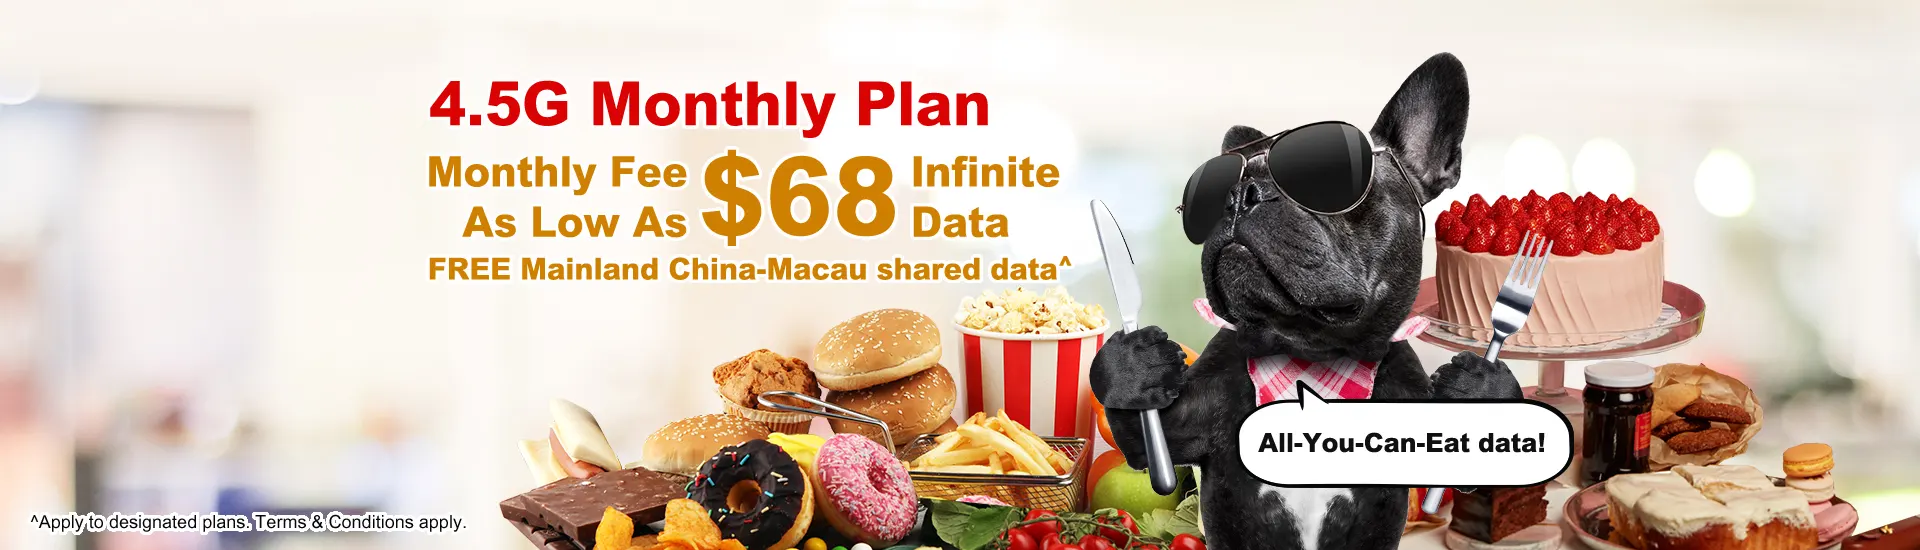 4.5G Monthly Plan, Monthly Fee as Low as $68 Infinite Data, FREE Mainland China-Macau shared data